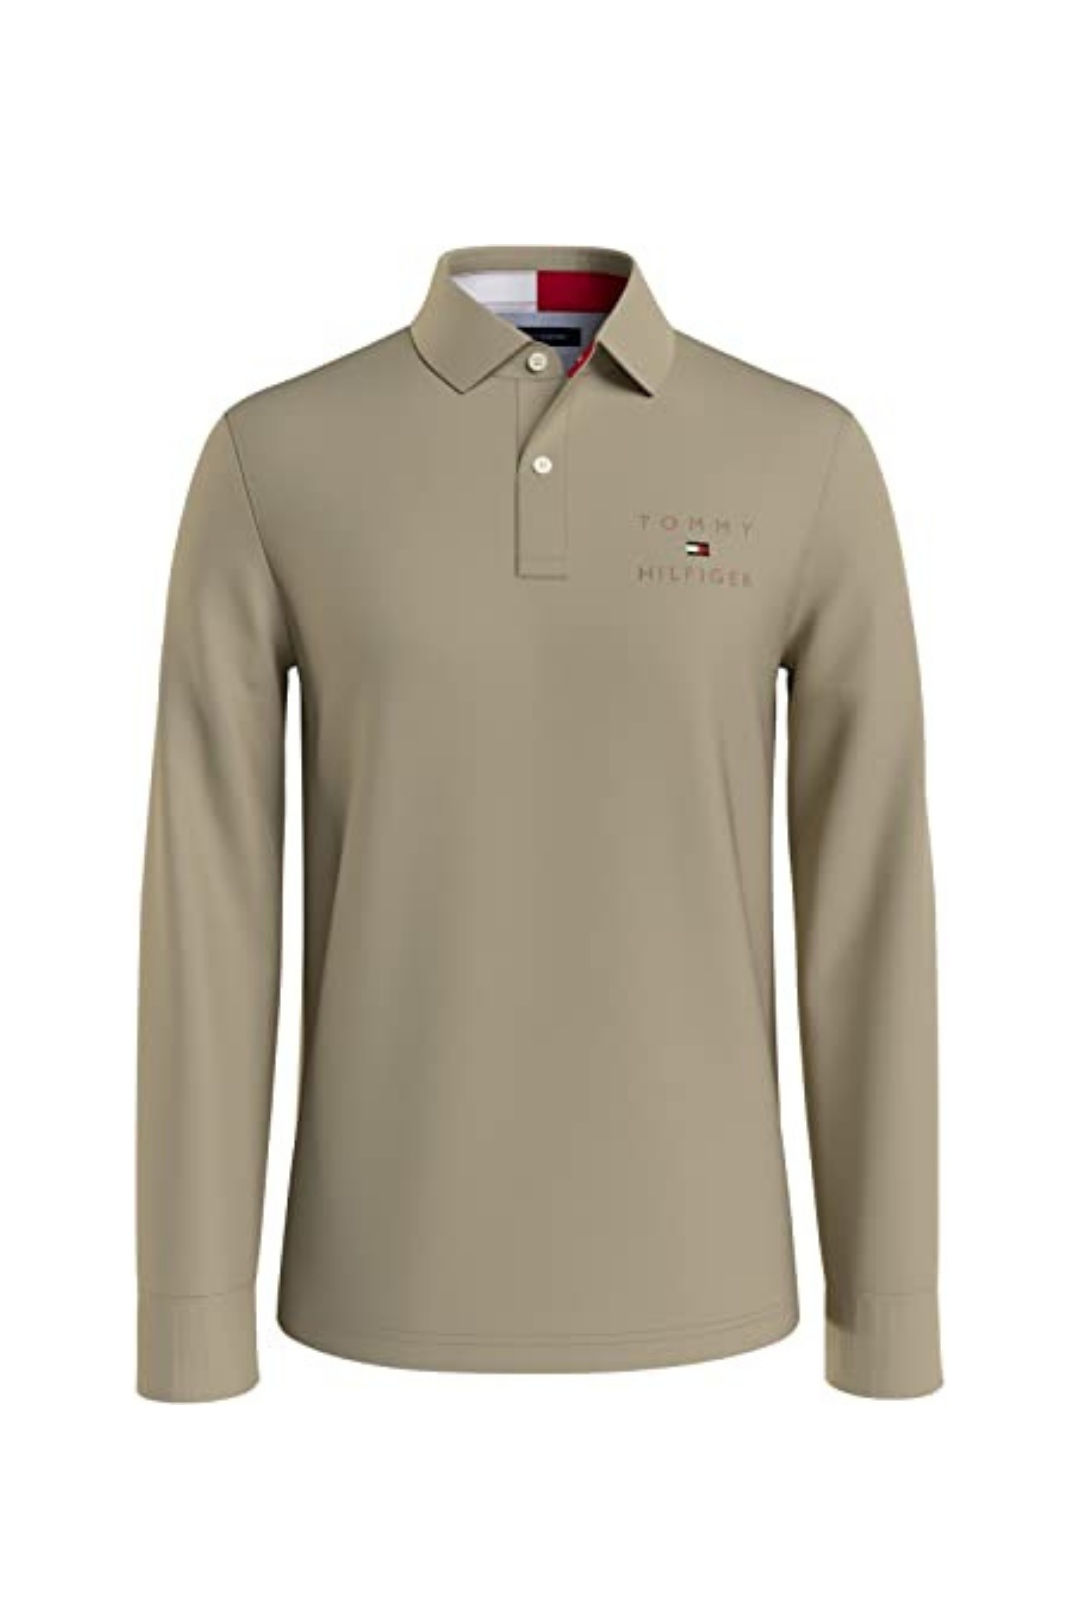 Tommy Hilfiger Long Sleeve Custom Fit Flag Polo Shirt – Premium Outlet